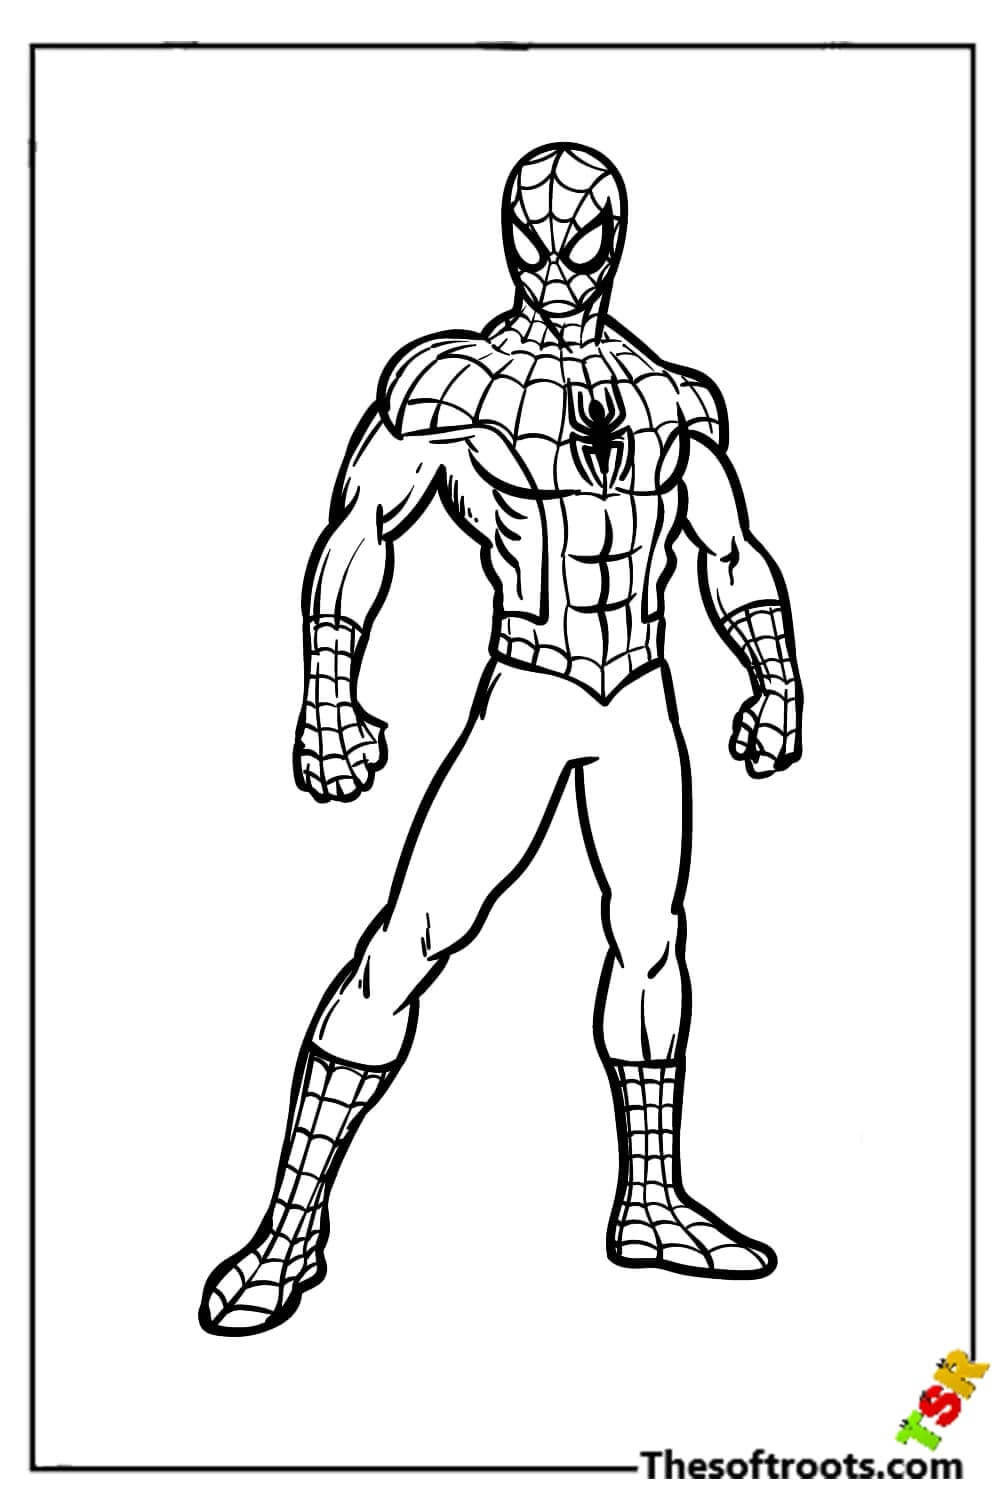 Simple Spiderman coloring pages